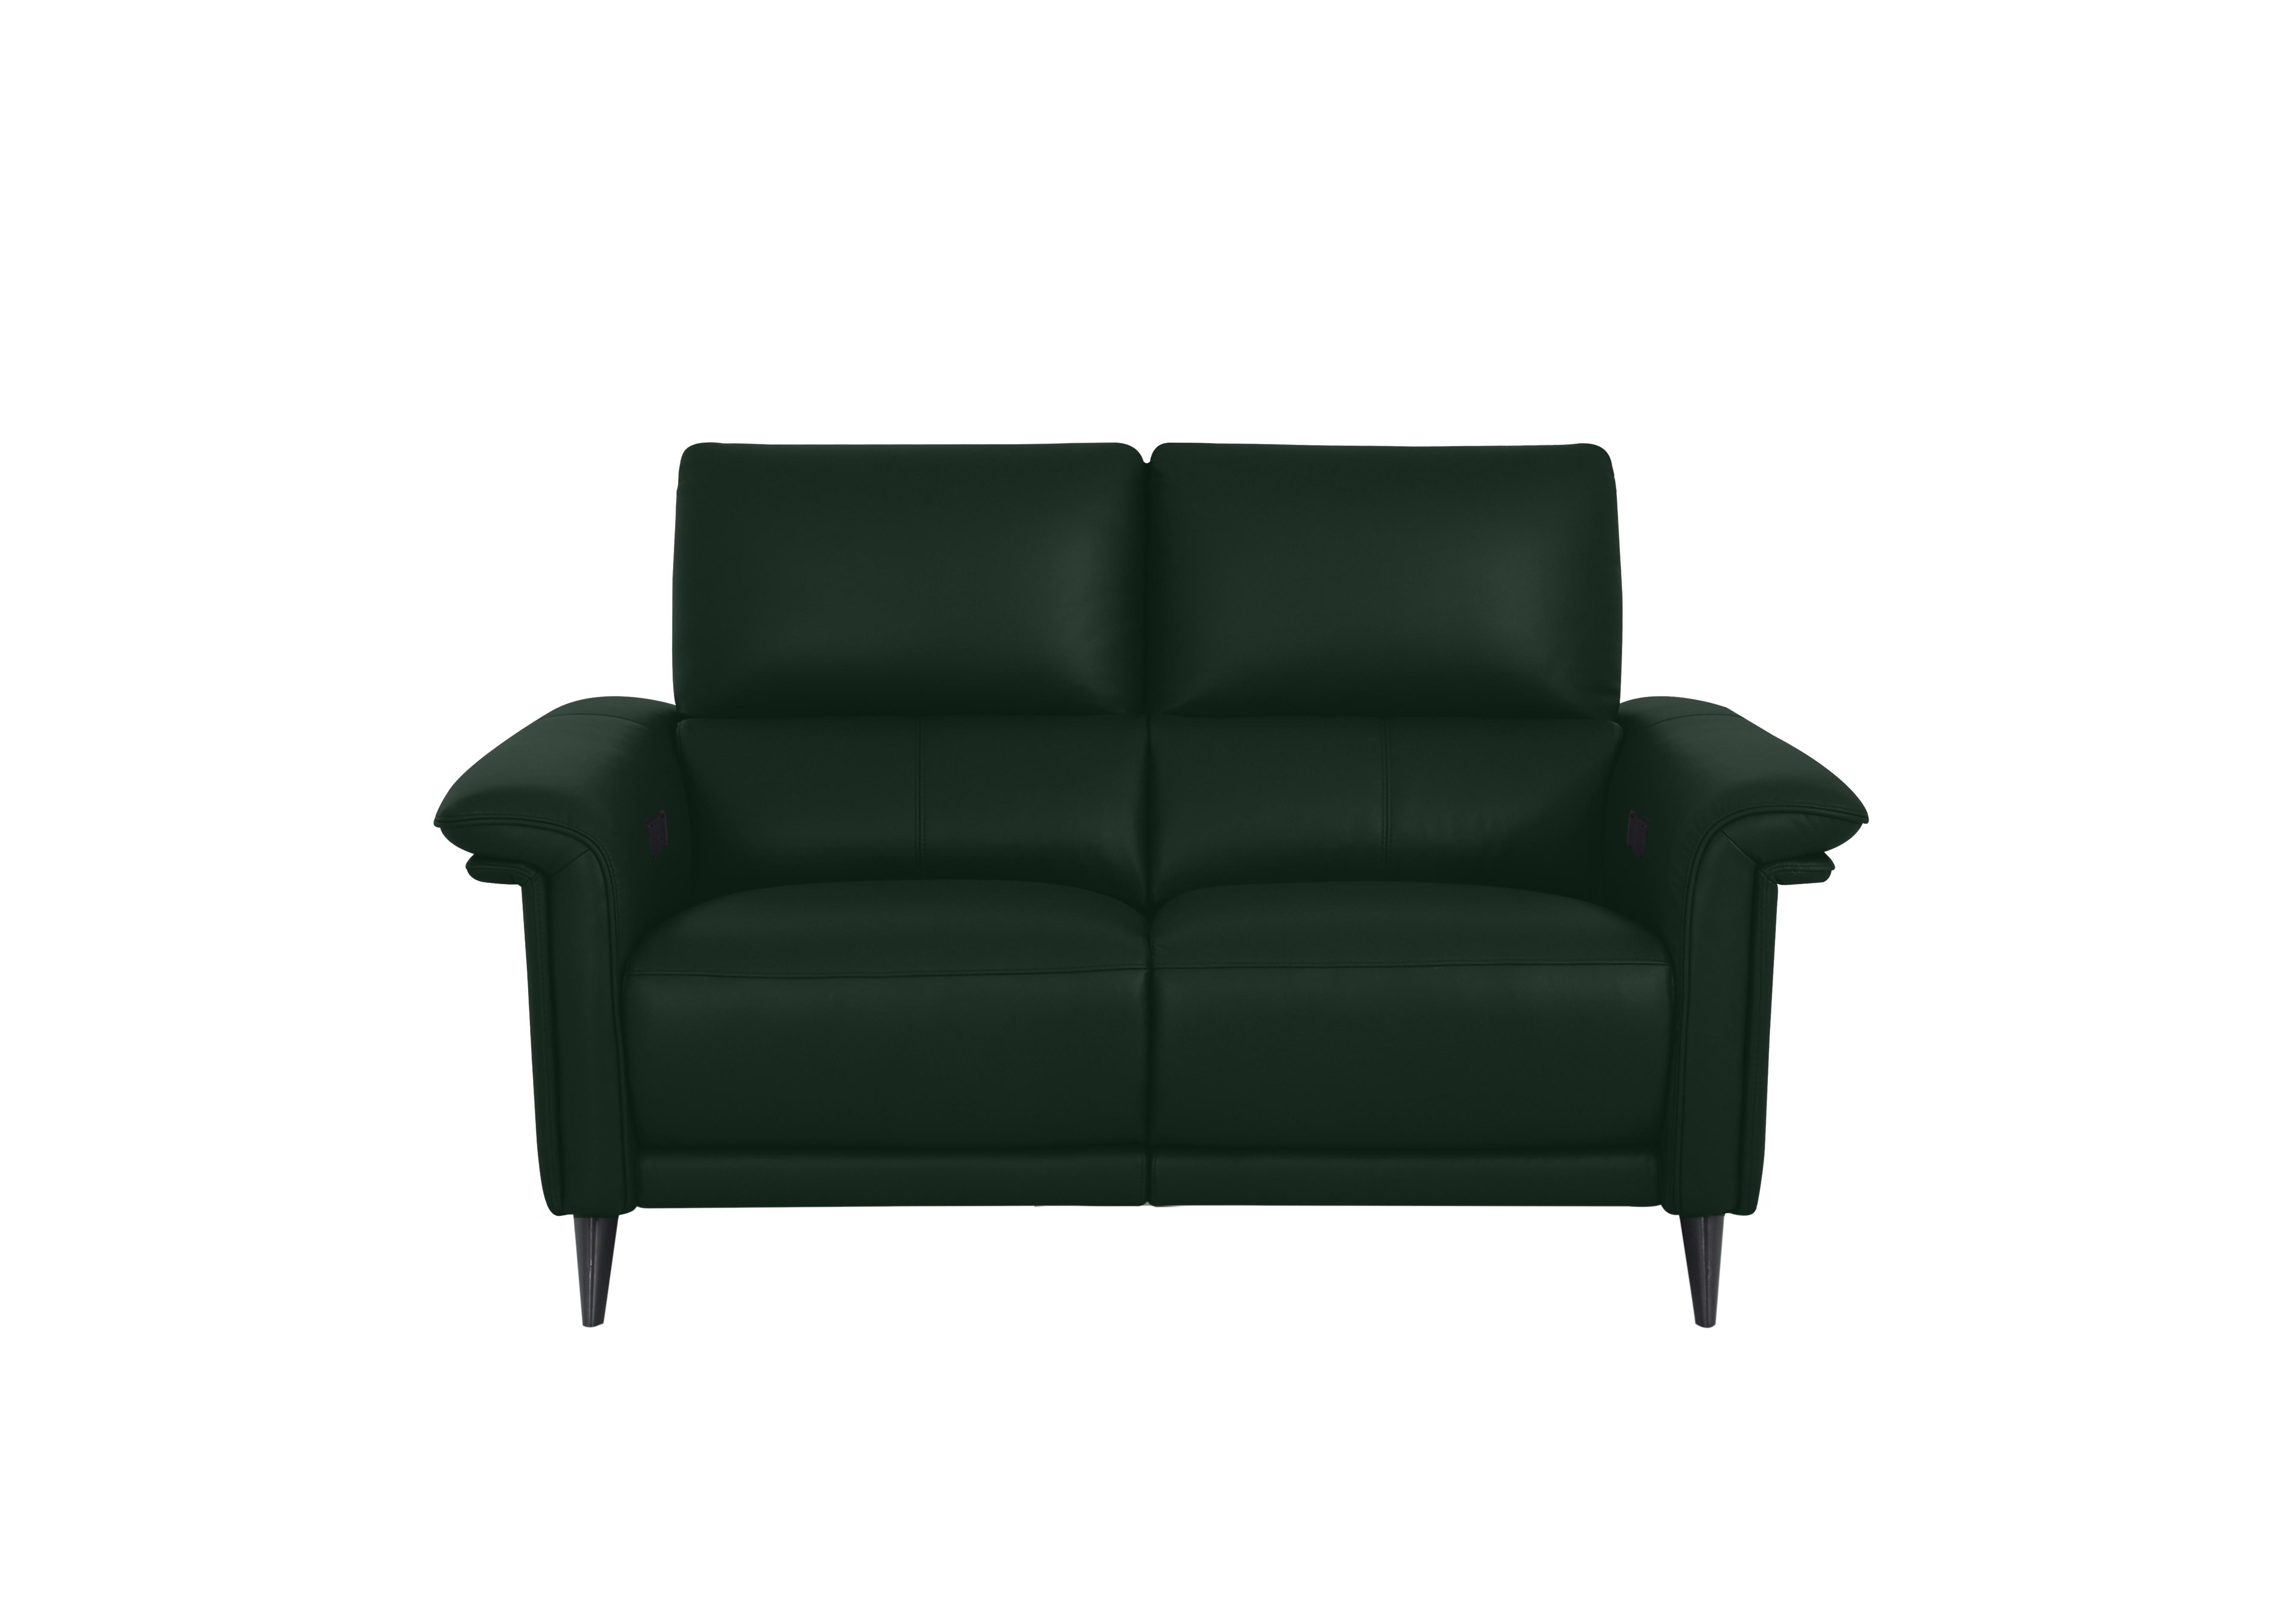 Huxley 2 Seater Leather Sofa in Np-603e Dark Forest on Furniture Village